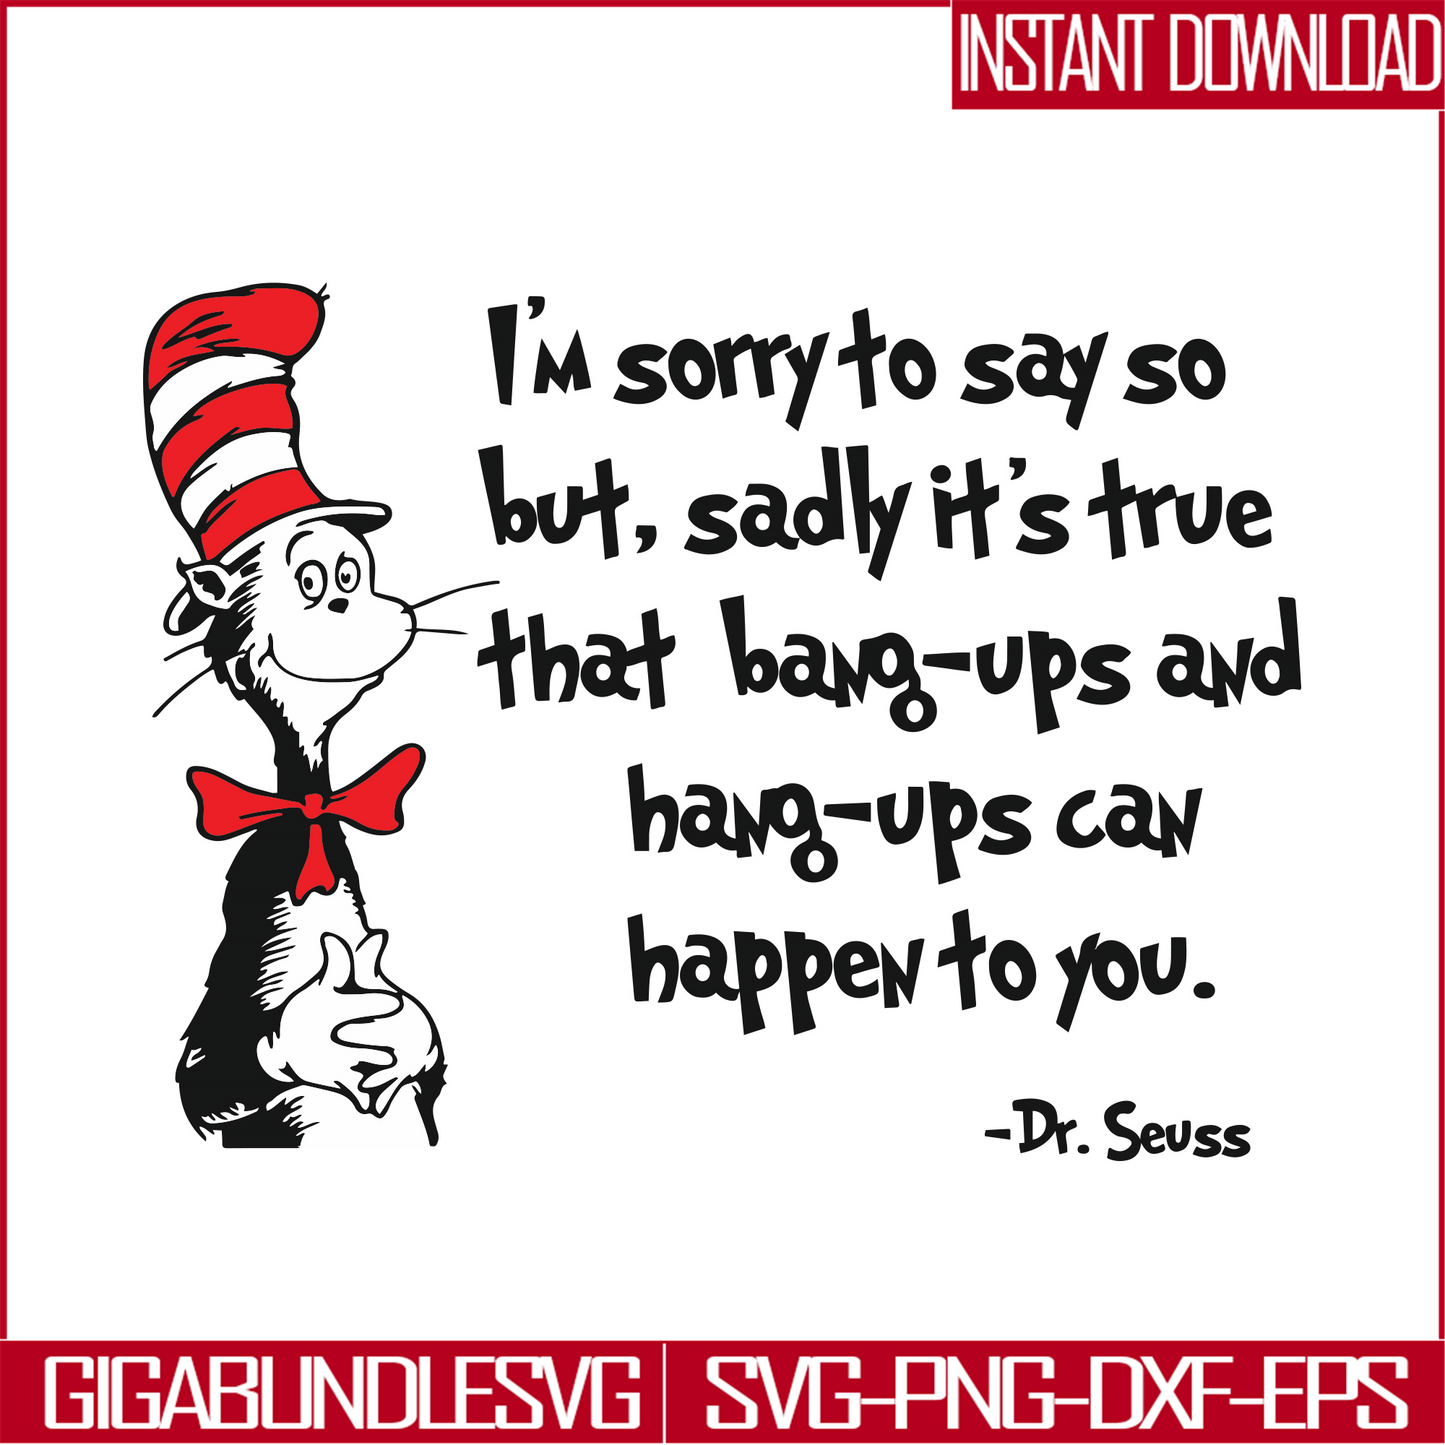 DR05012143-I am sorry to say so but, sadly it is true that bang-ups and hang-ups can happen to you dr seuss svg, dr seuss svg, dr svg, png, dxf, eps file DR05012143